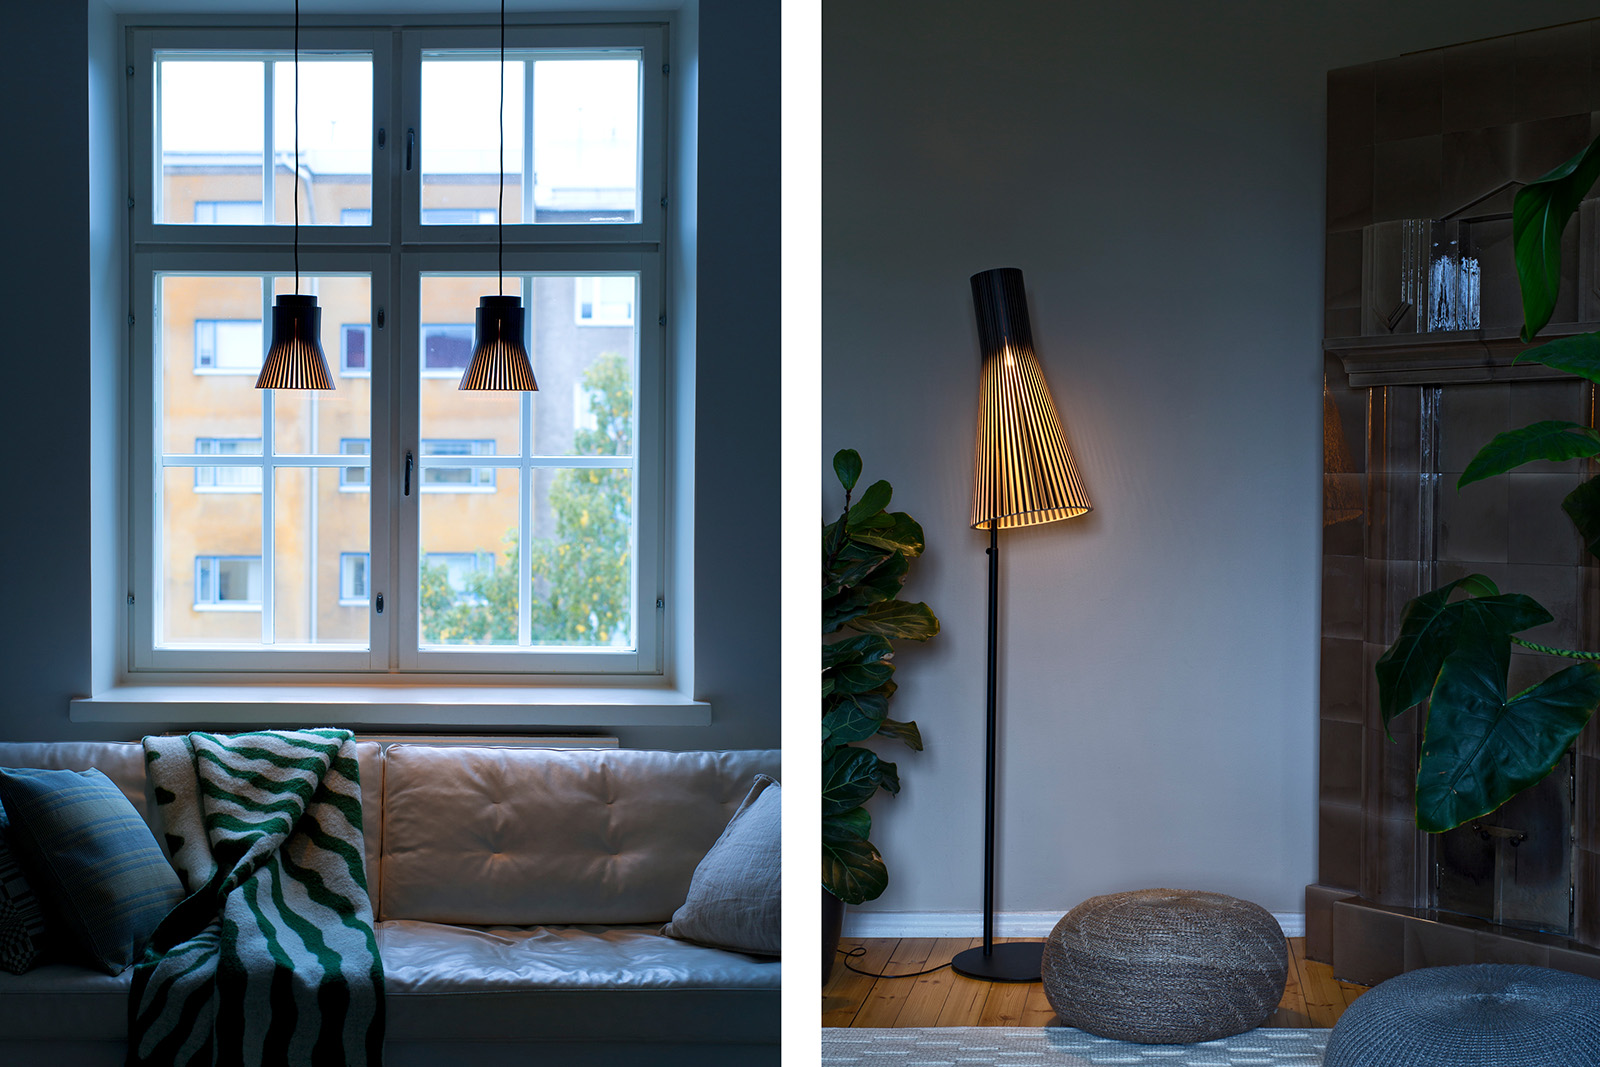 Two images side by side: one with two pendants in front of a window and the other with a floor lamp next to a fire place.